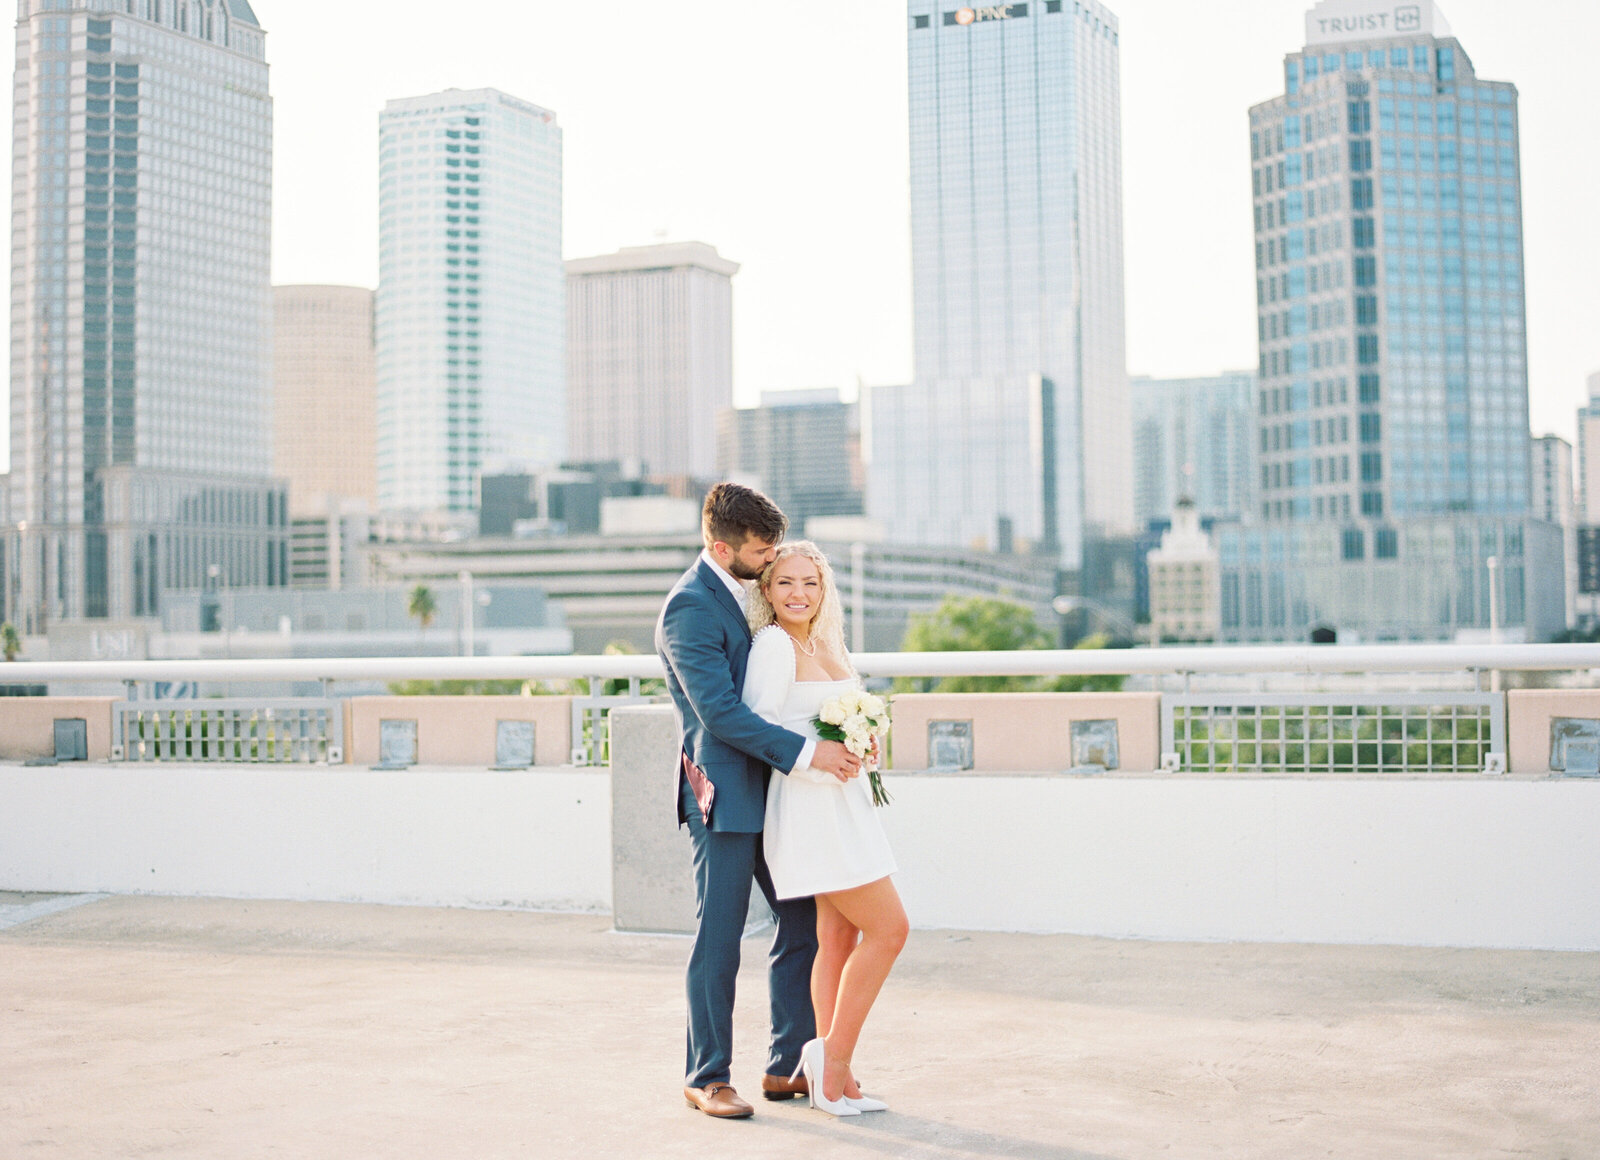 Madeleine-Paul-Film-Dowtown-Tampa-EngagementSession-Ruth-Terrero-Photography-7408-15-2